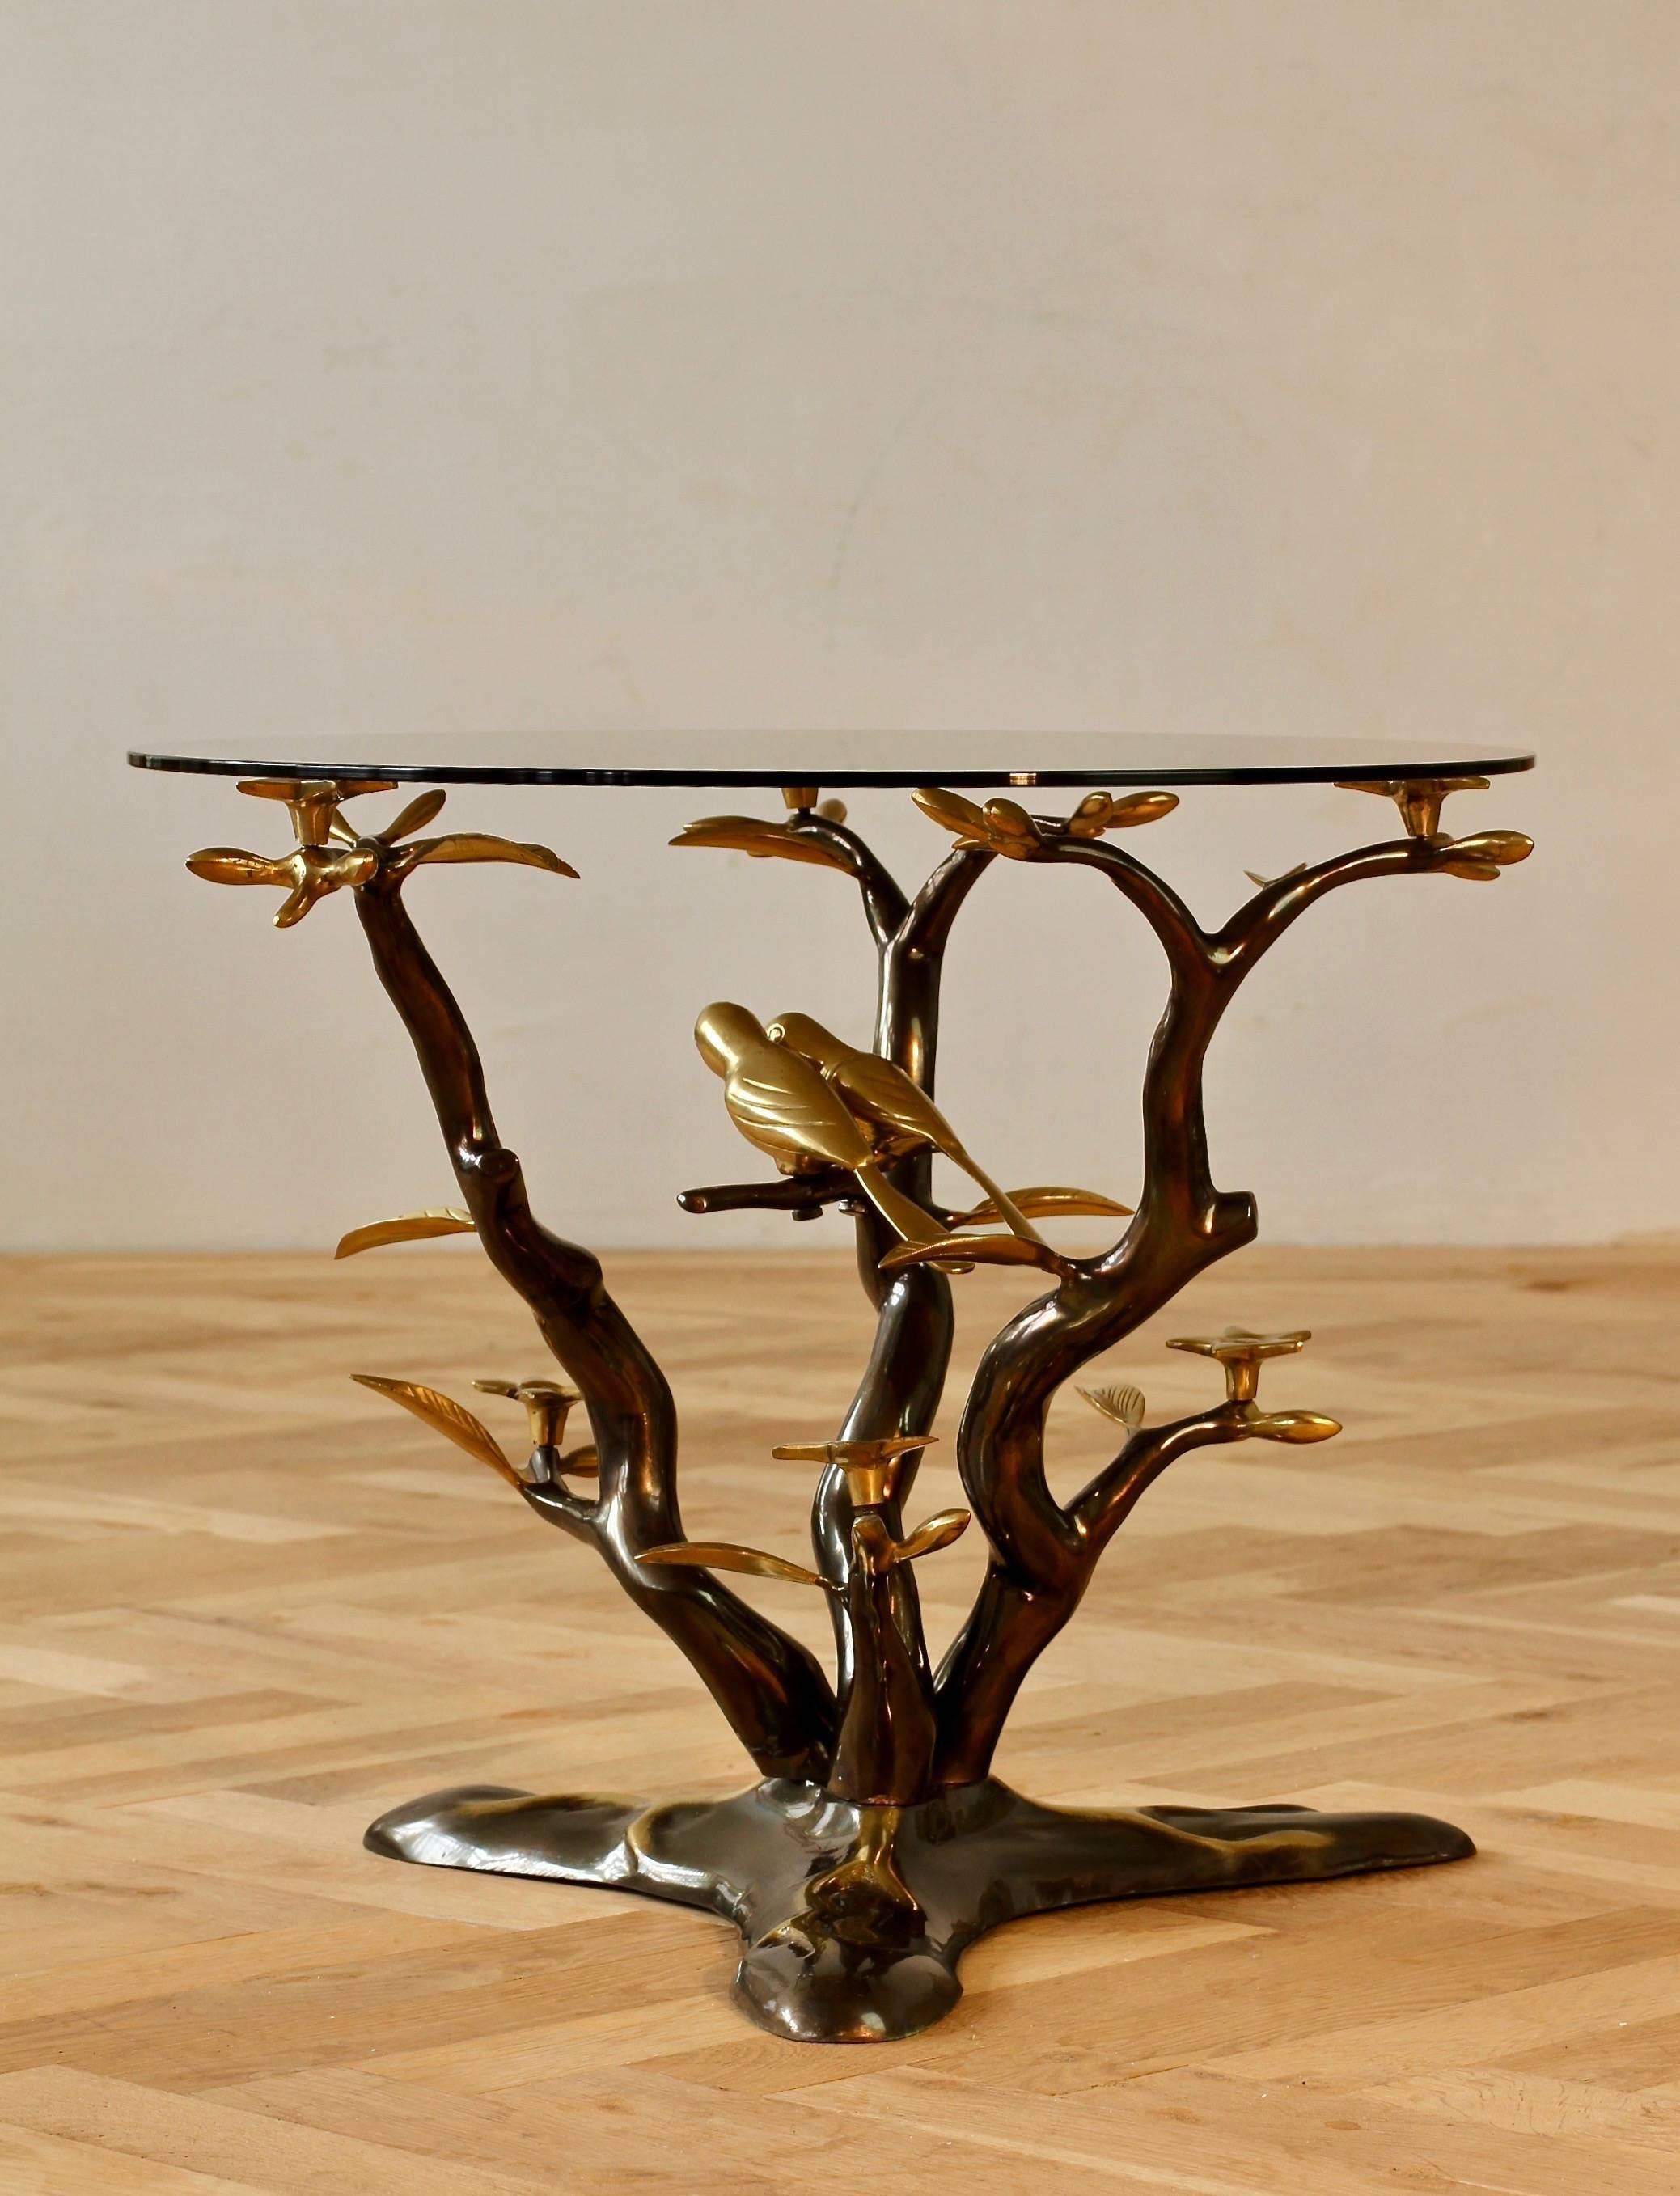 Polished Organic Cast Brass Love Birds Tree Form Side or End Table, Belgium, circa 1975